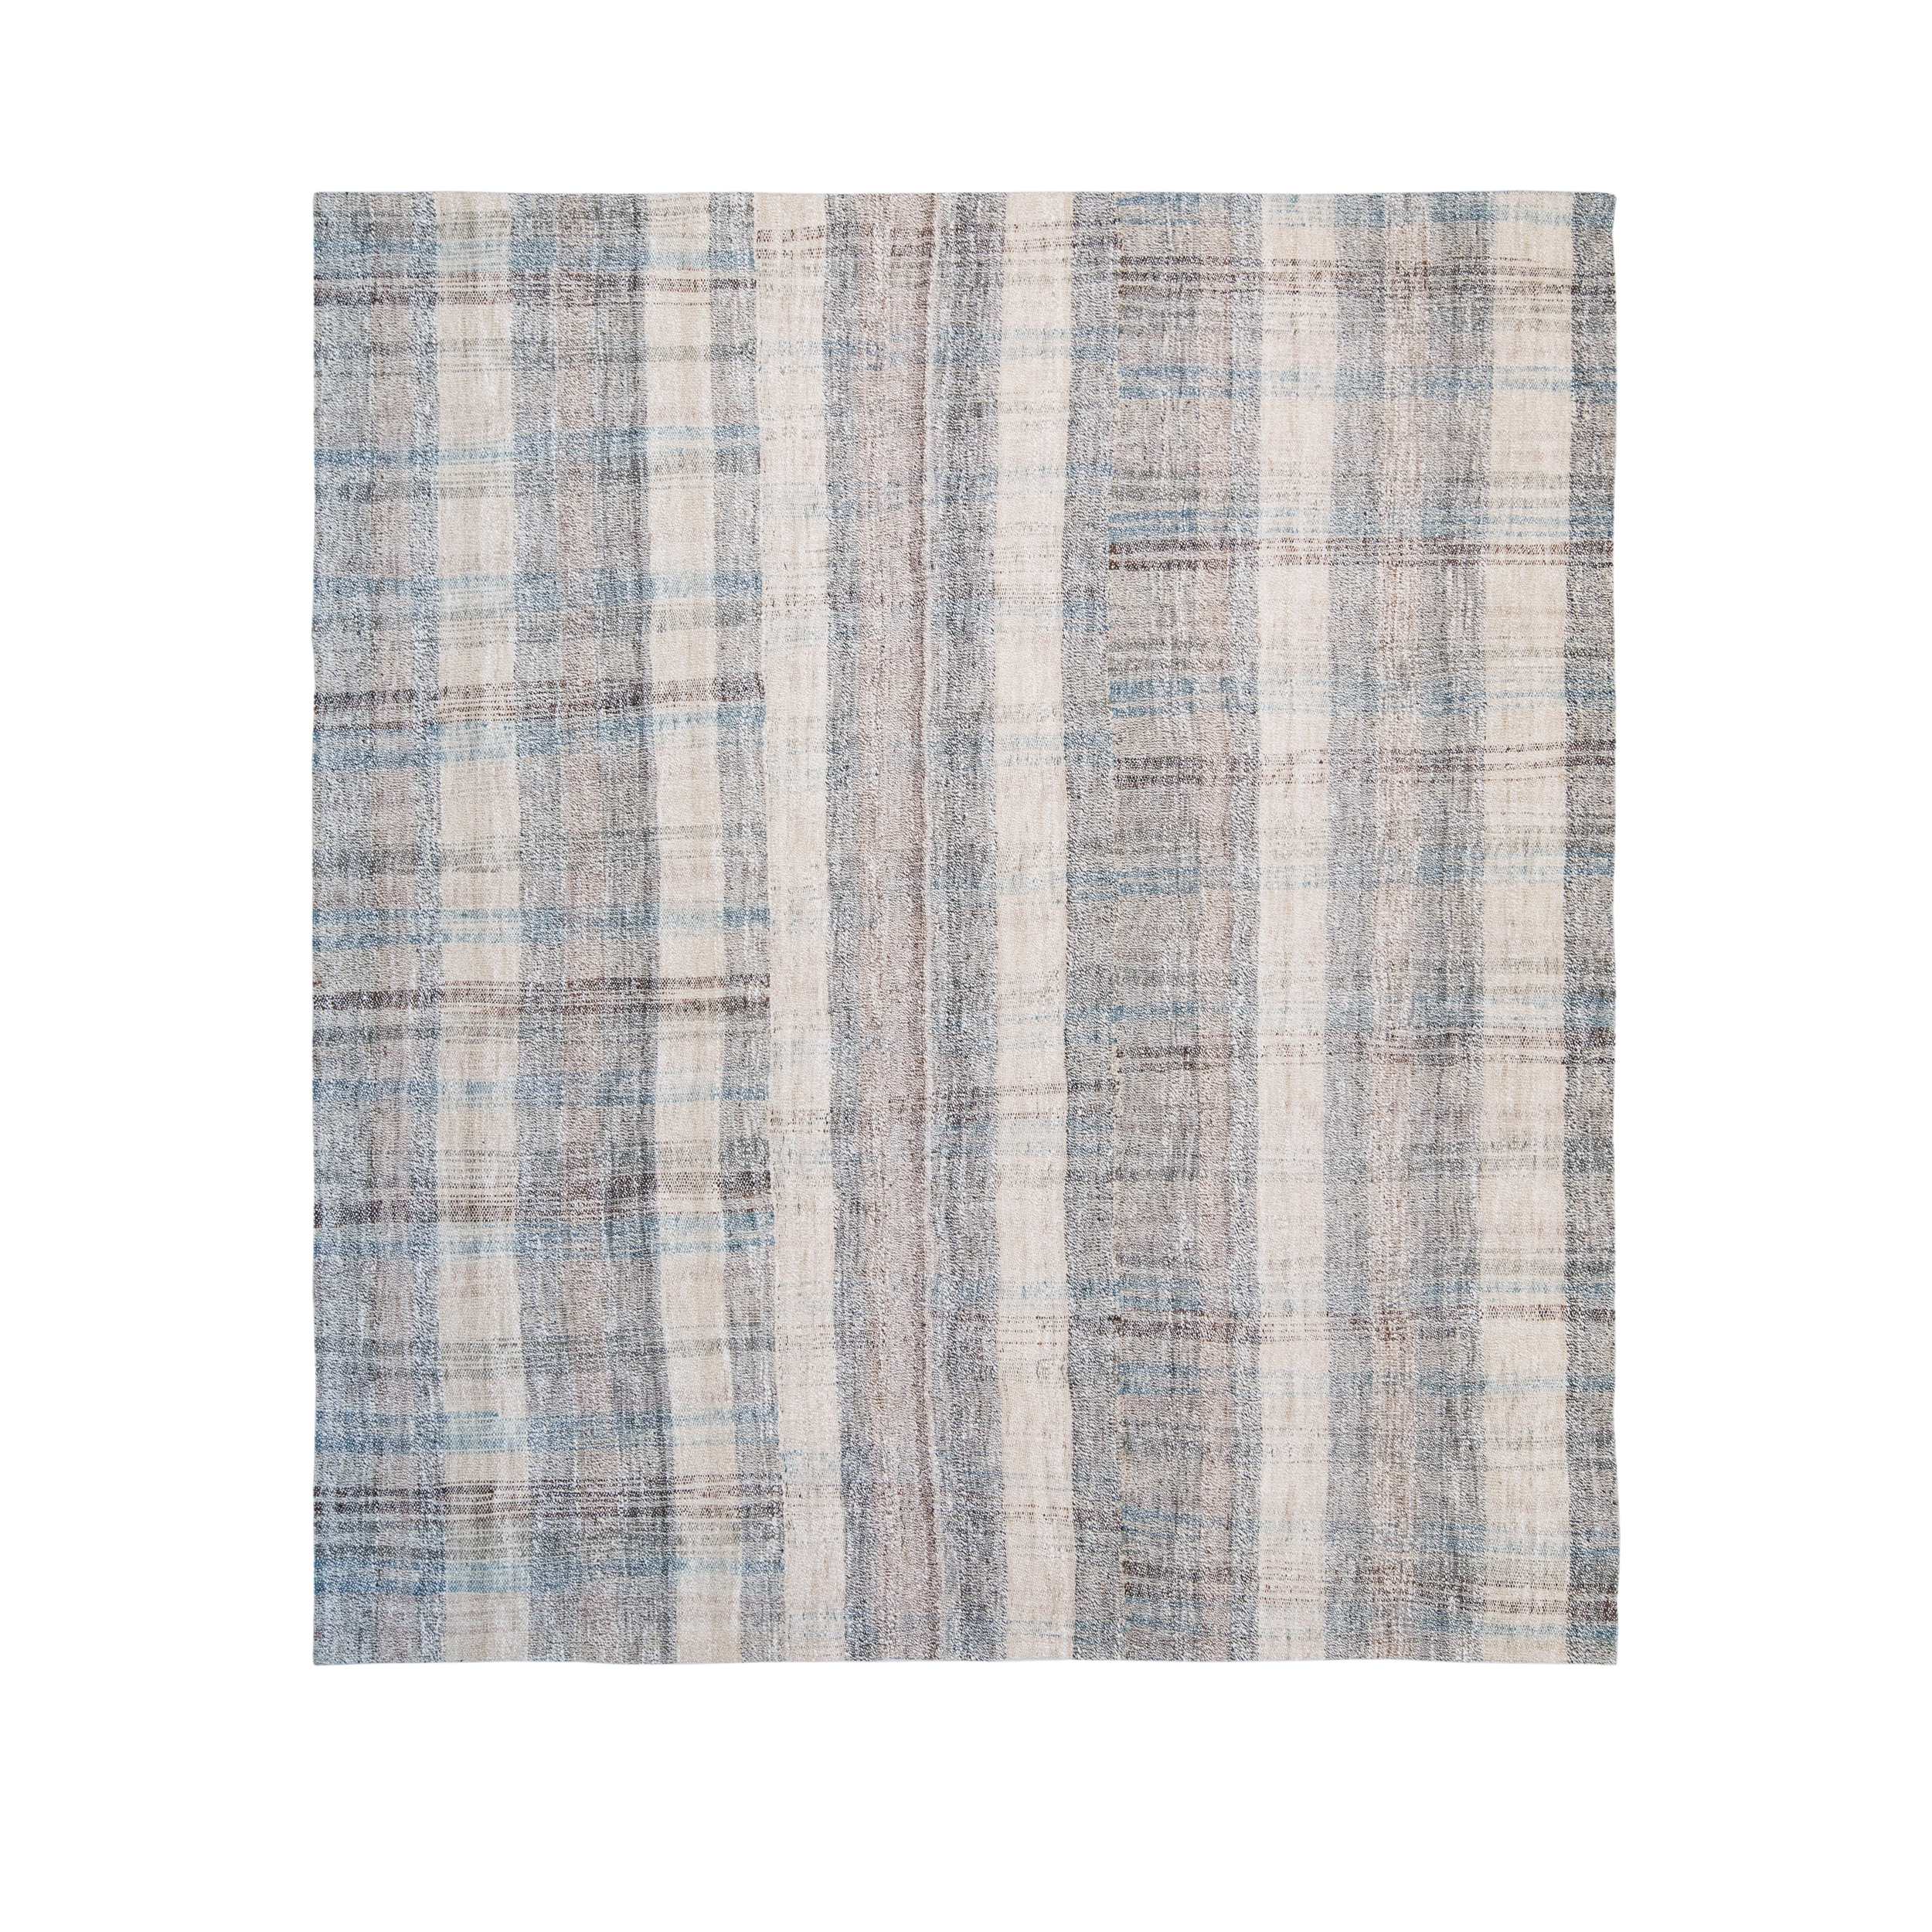 This Pelas flatweave rug is hand-woven and made of wool and cotton. 